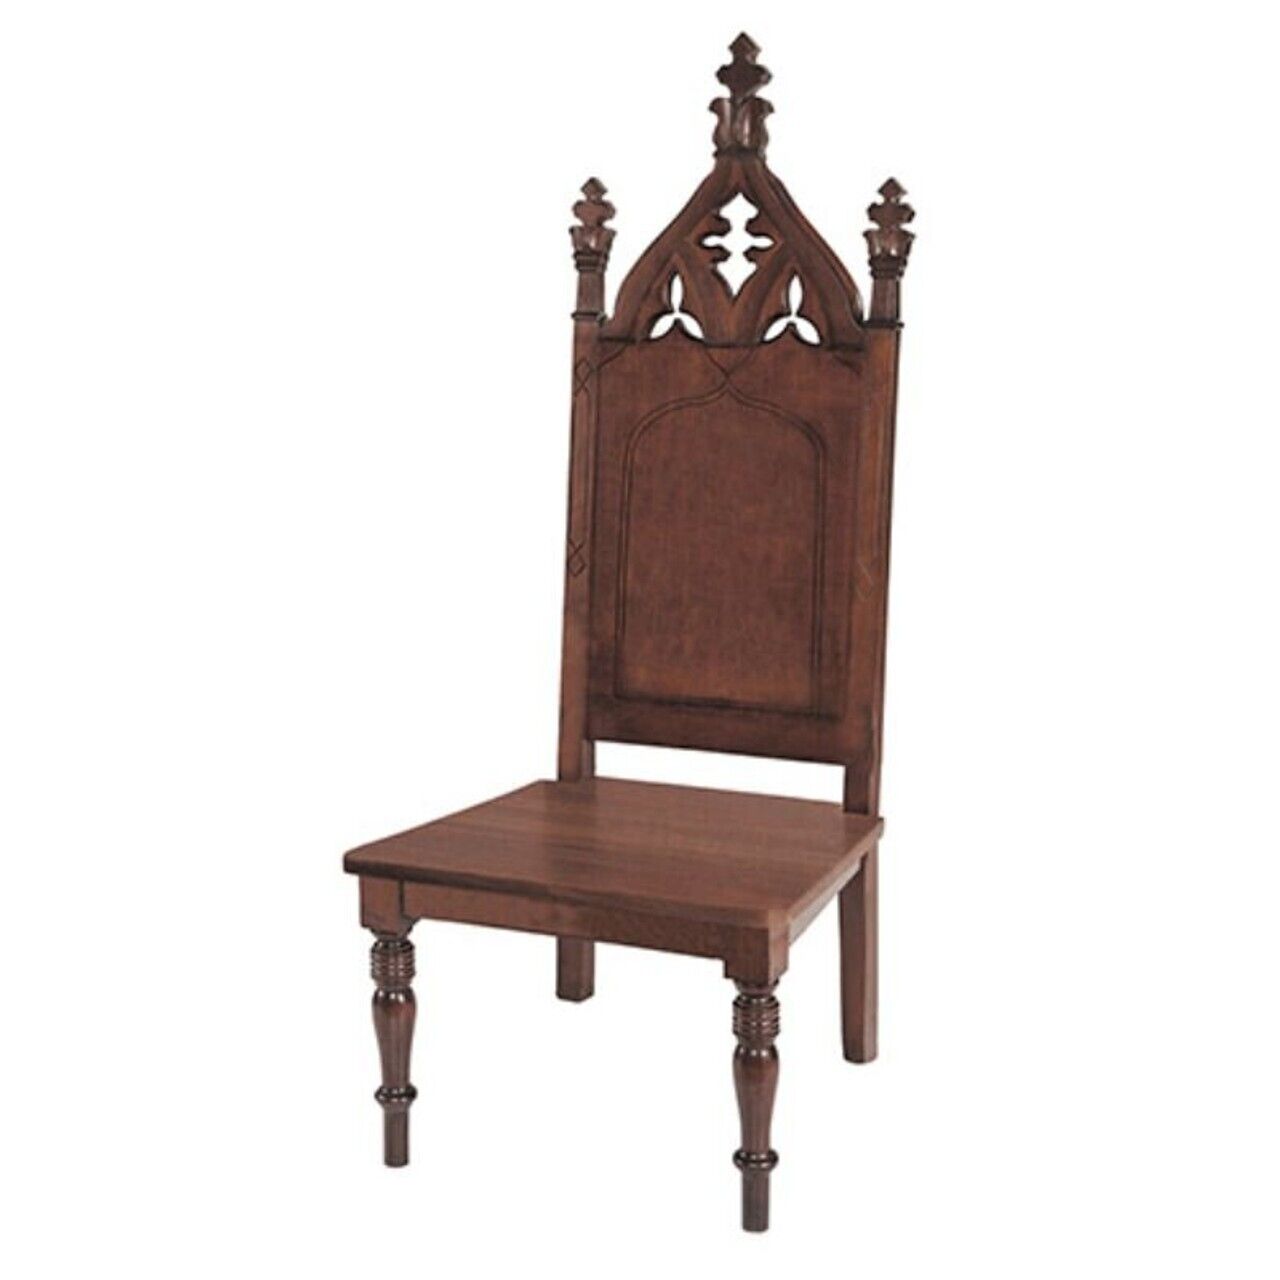 Ornate Walnut Stain Maple Hardwood Cathedral Side Chair for Church Use 48 In